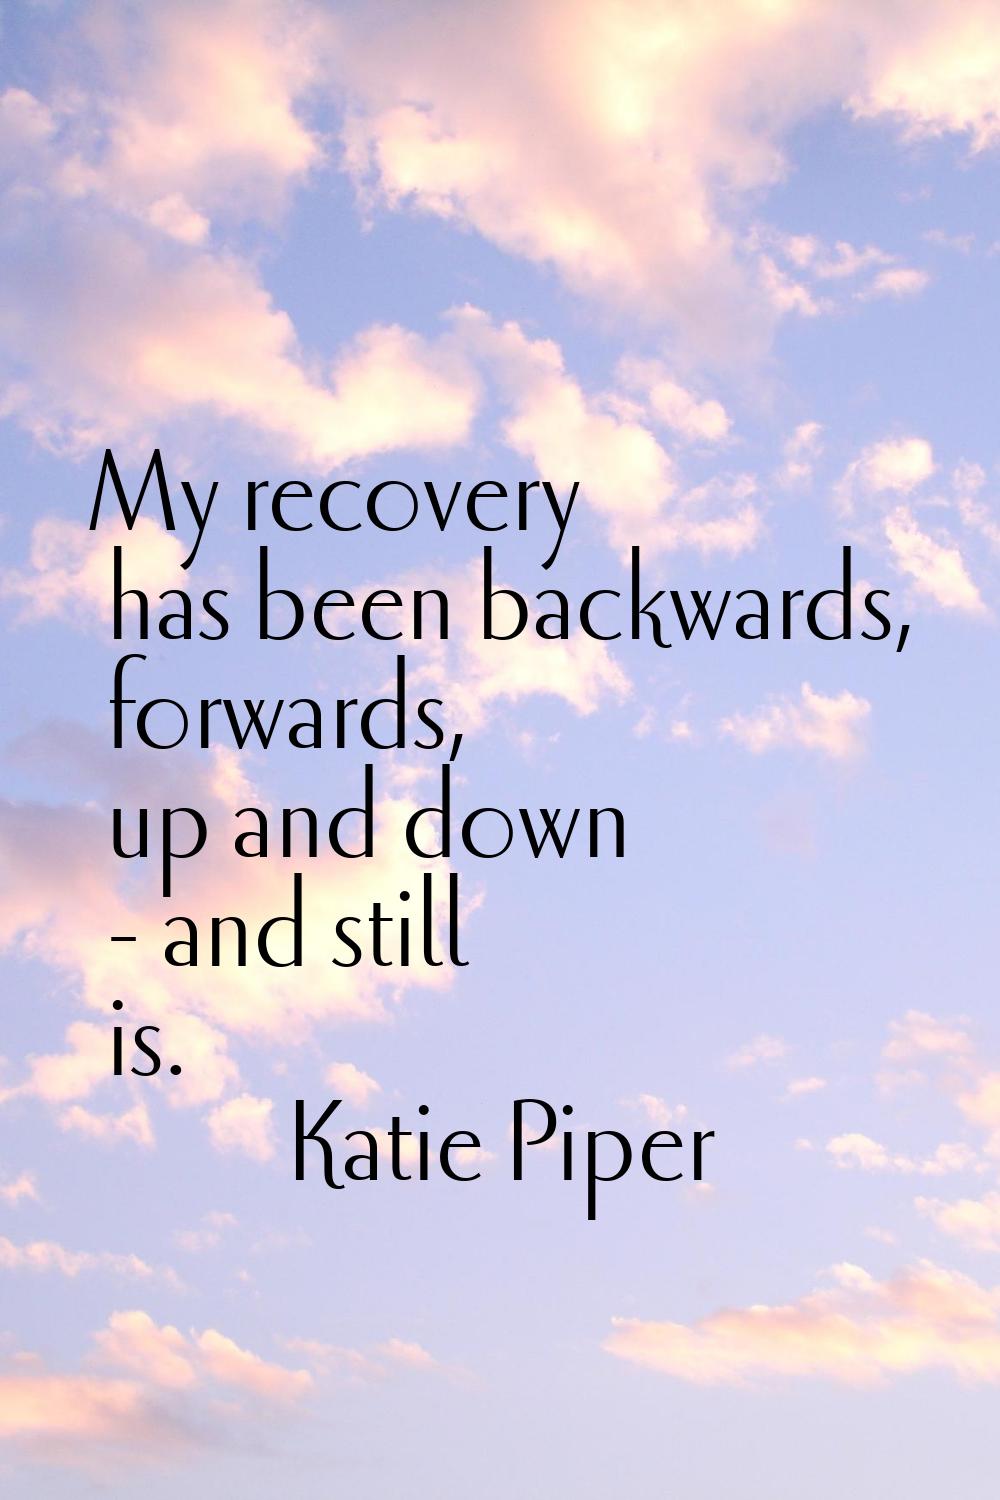 My recovery has been backwards, forwards, up and down - and still is.